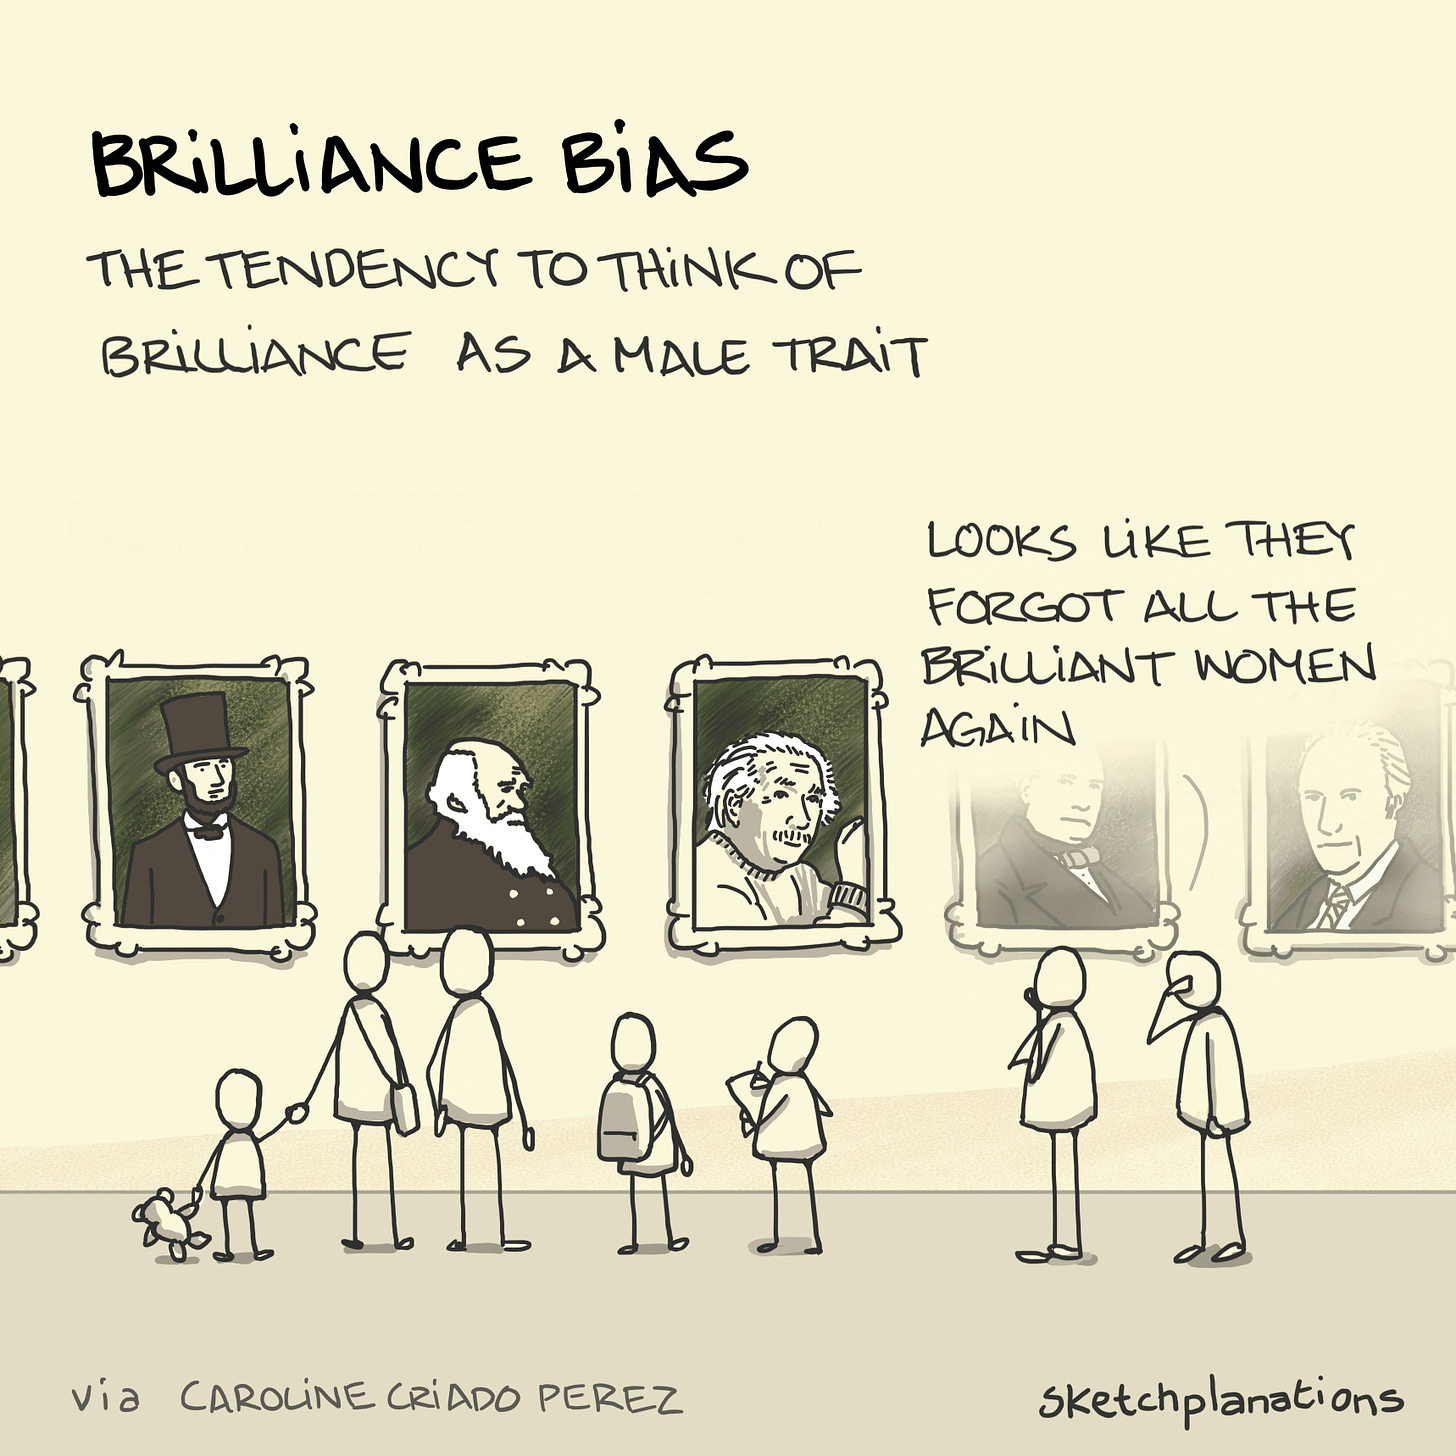 Brilliance bias: The tendency to think of brilliance as a male trait.